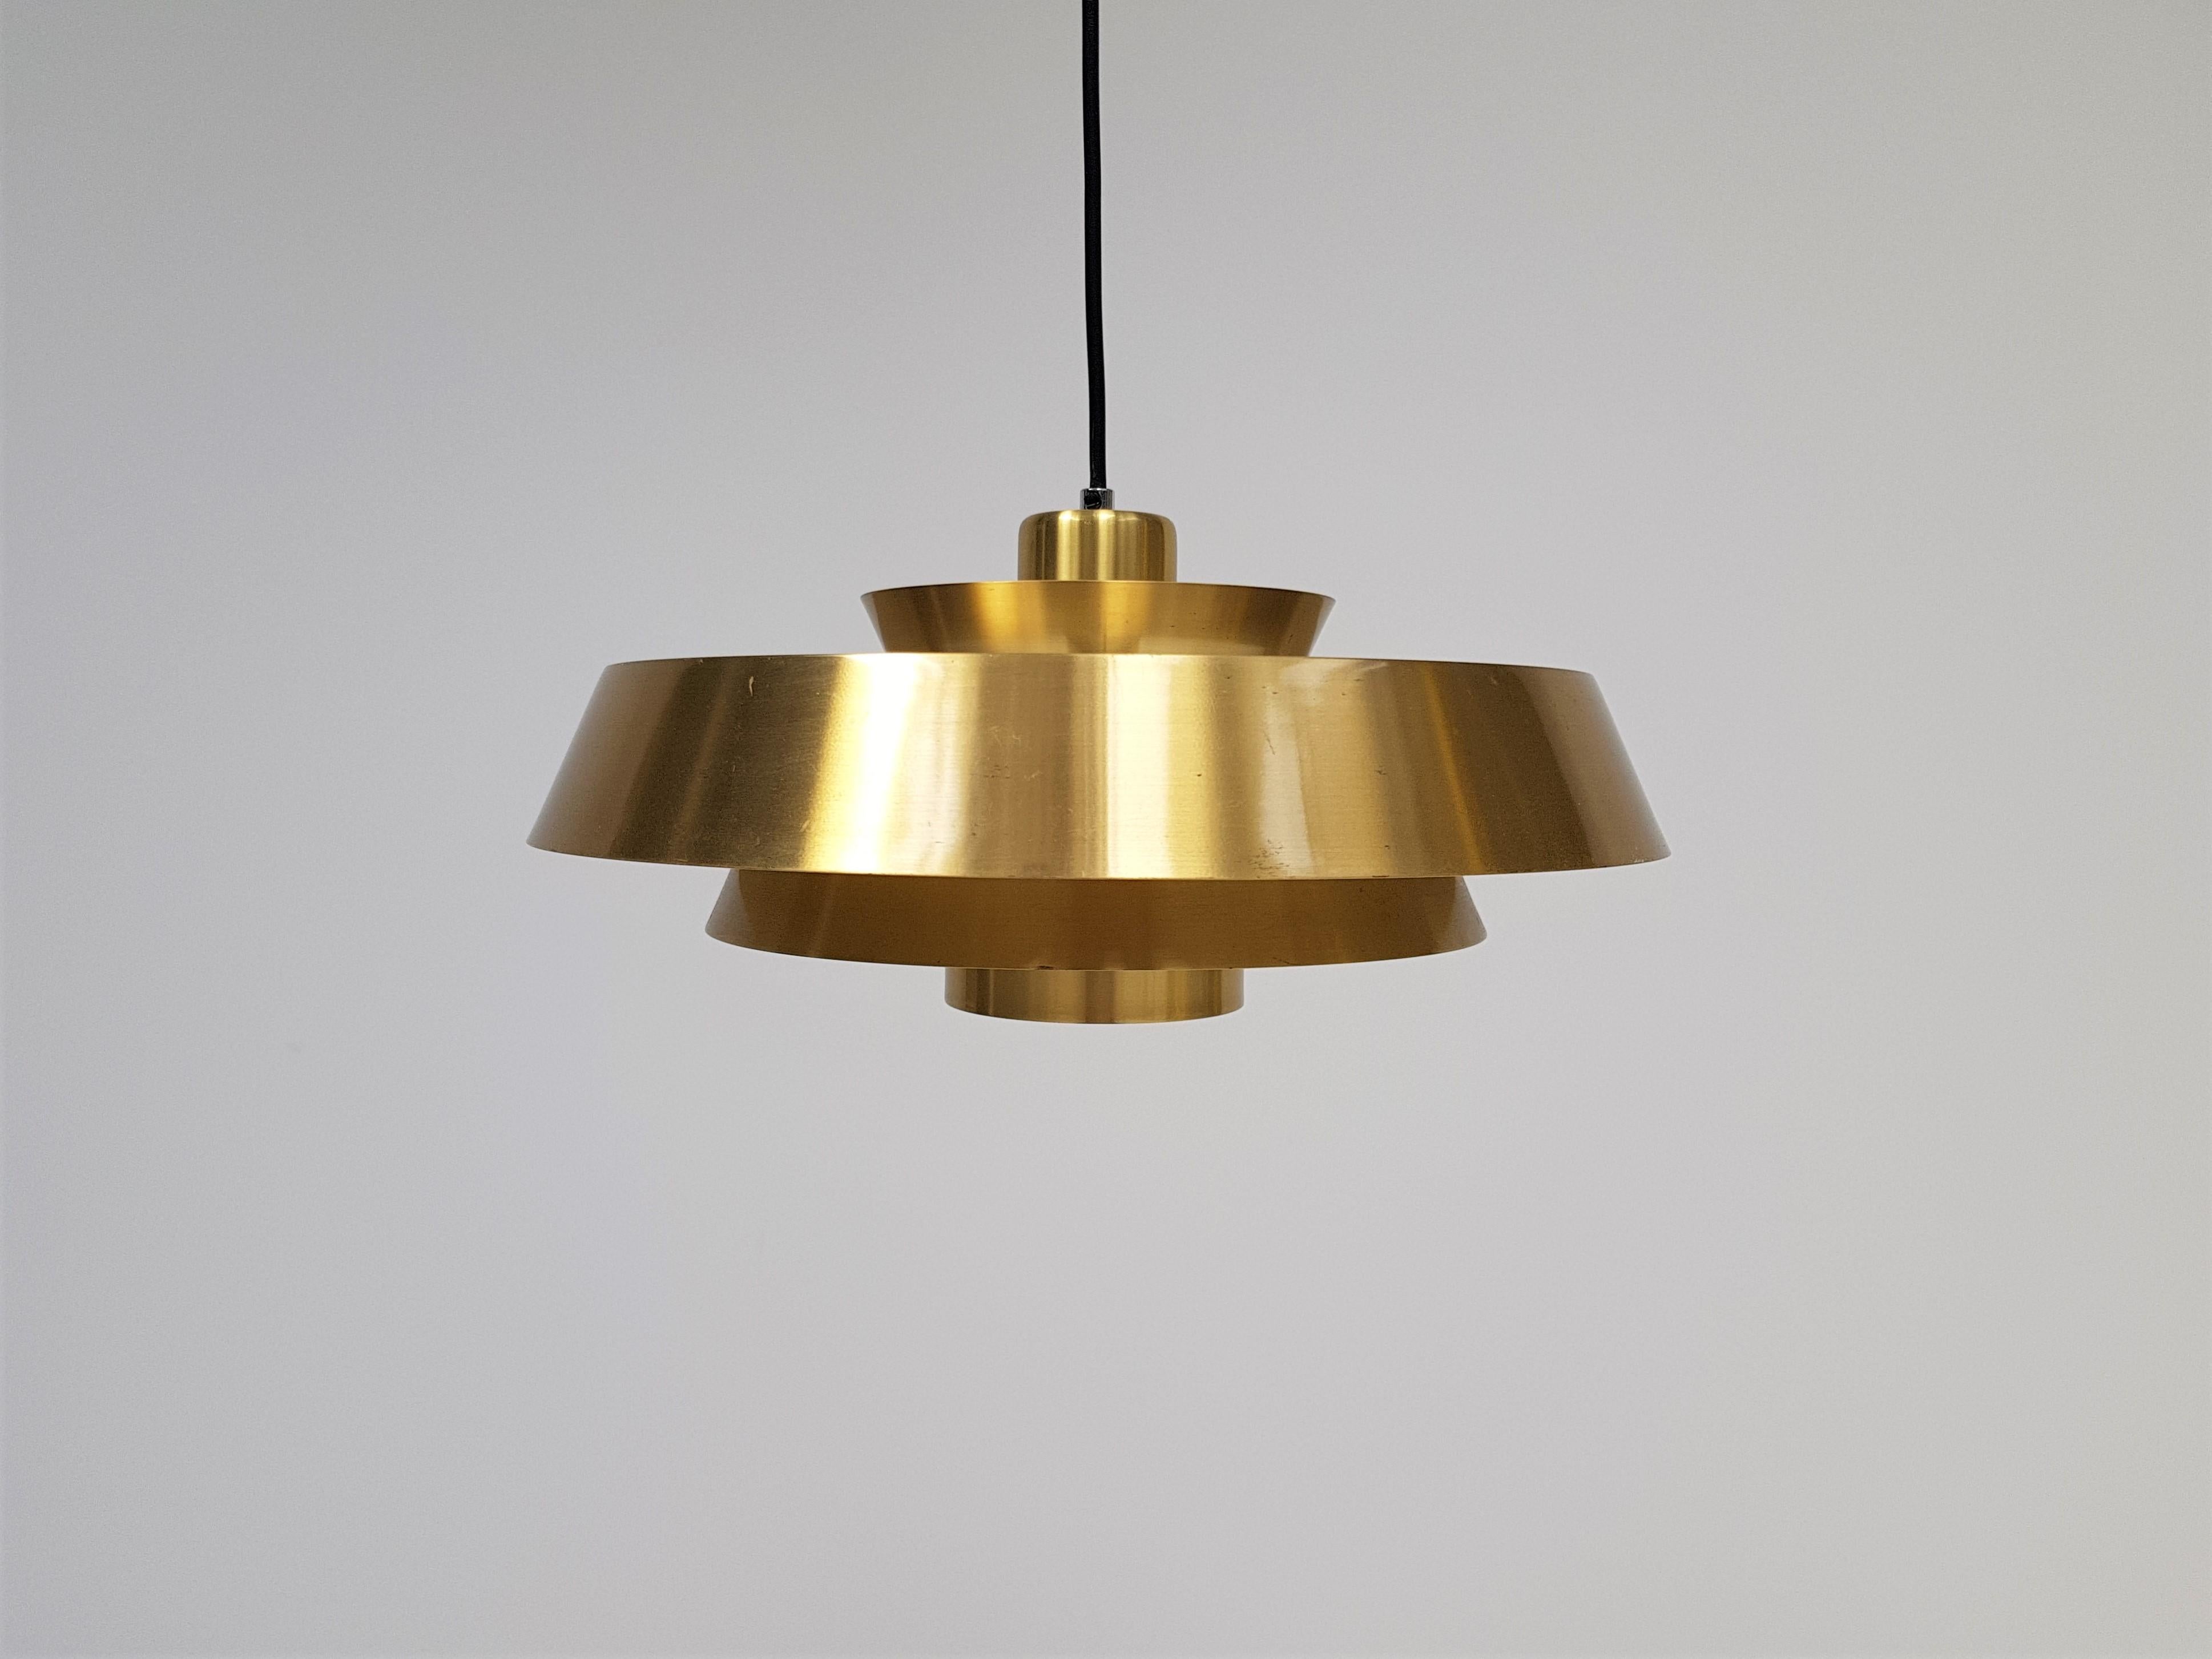 Jo Hammerborg Nova pendant light in brass for Fog & Mørup, Denmark, 1960s.

This vintage modernist light fixture is crafted in brass in three round, graduated tiers.

In 1957 Jo Hammerborg became head of design at Fog & Mørup. His incumbency in